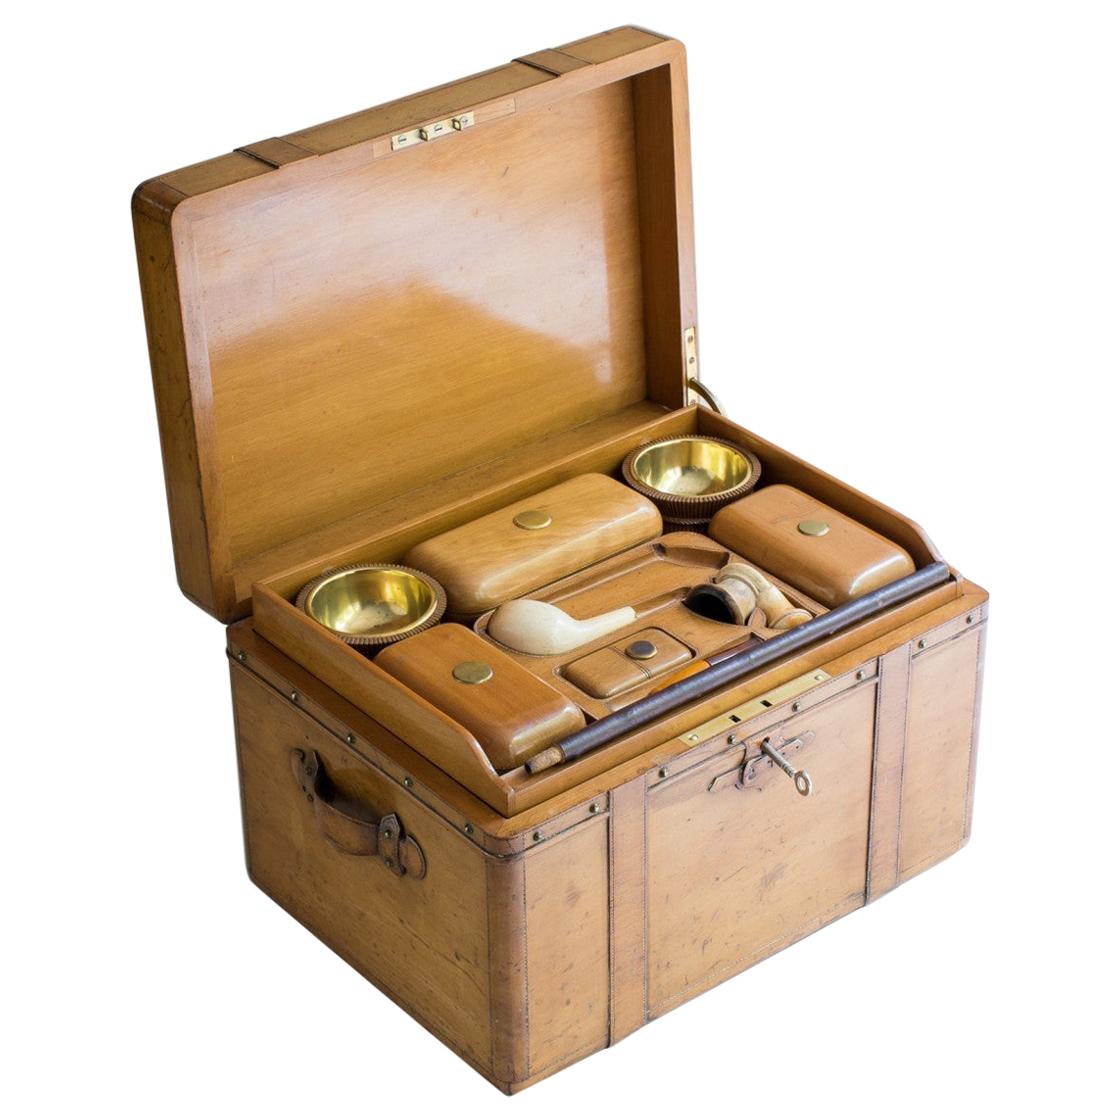 Carved Wooden Trunk/Smokers Compendium, circa 1900